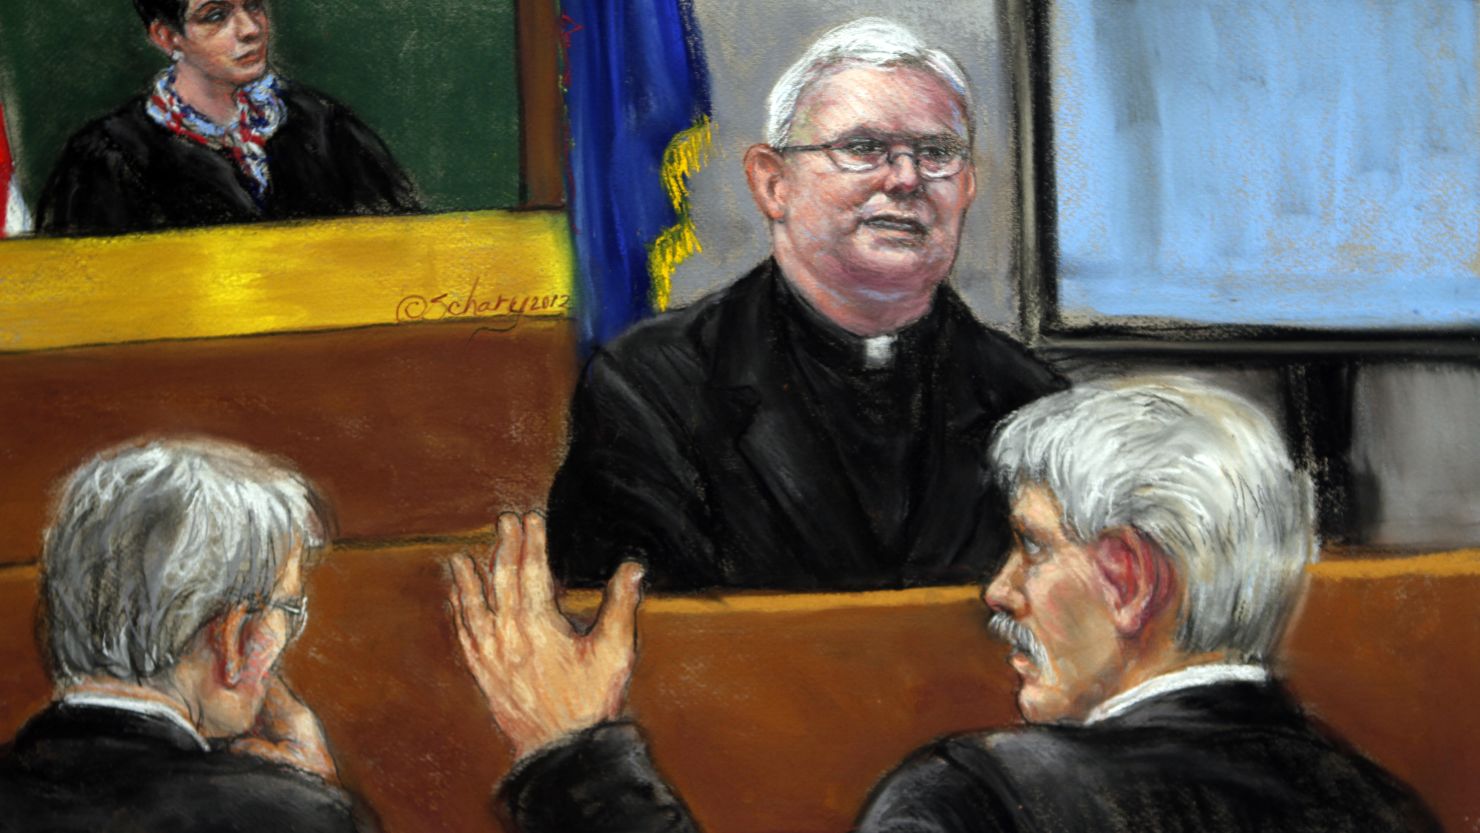 Monsignor William Lynn was found guilty Friday of one count of child endangerment.